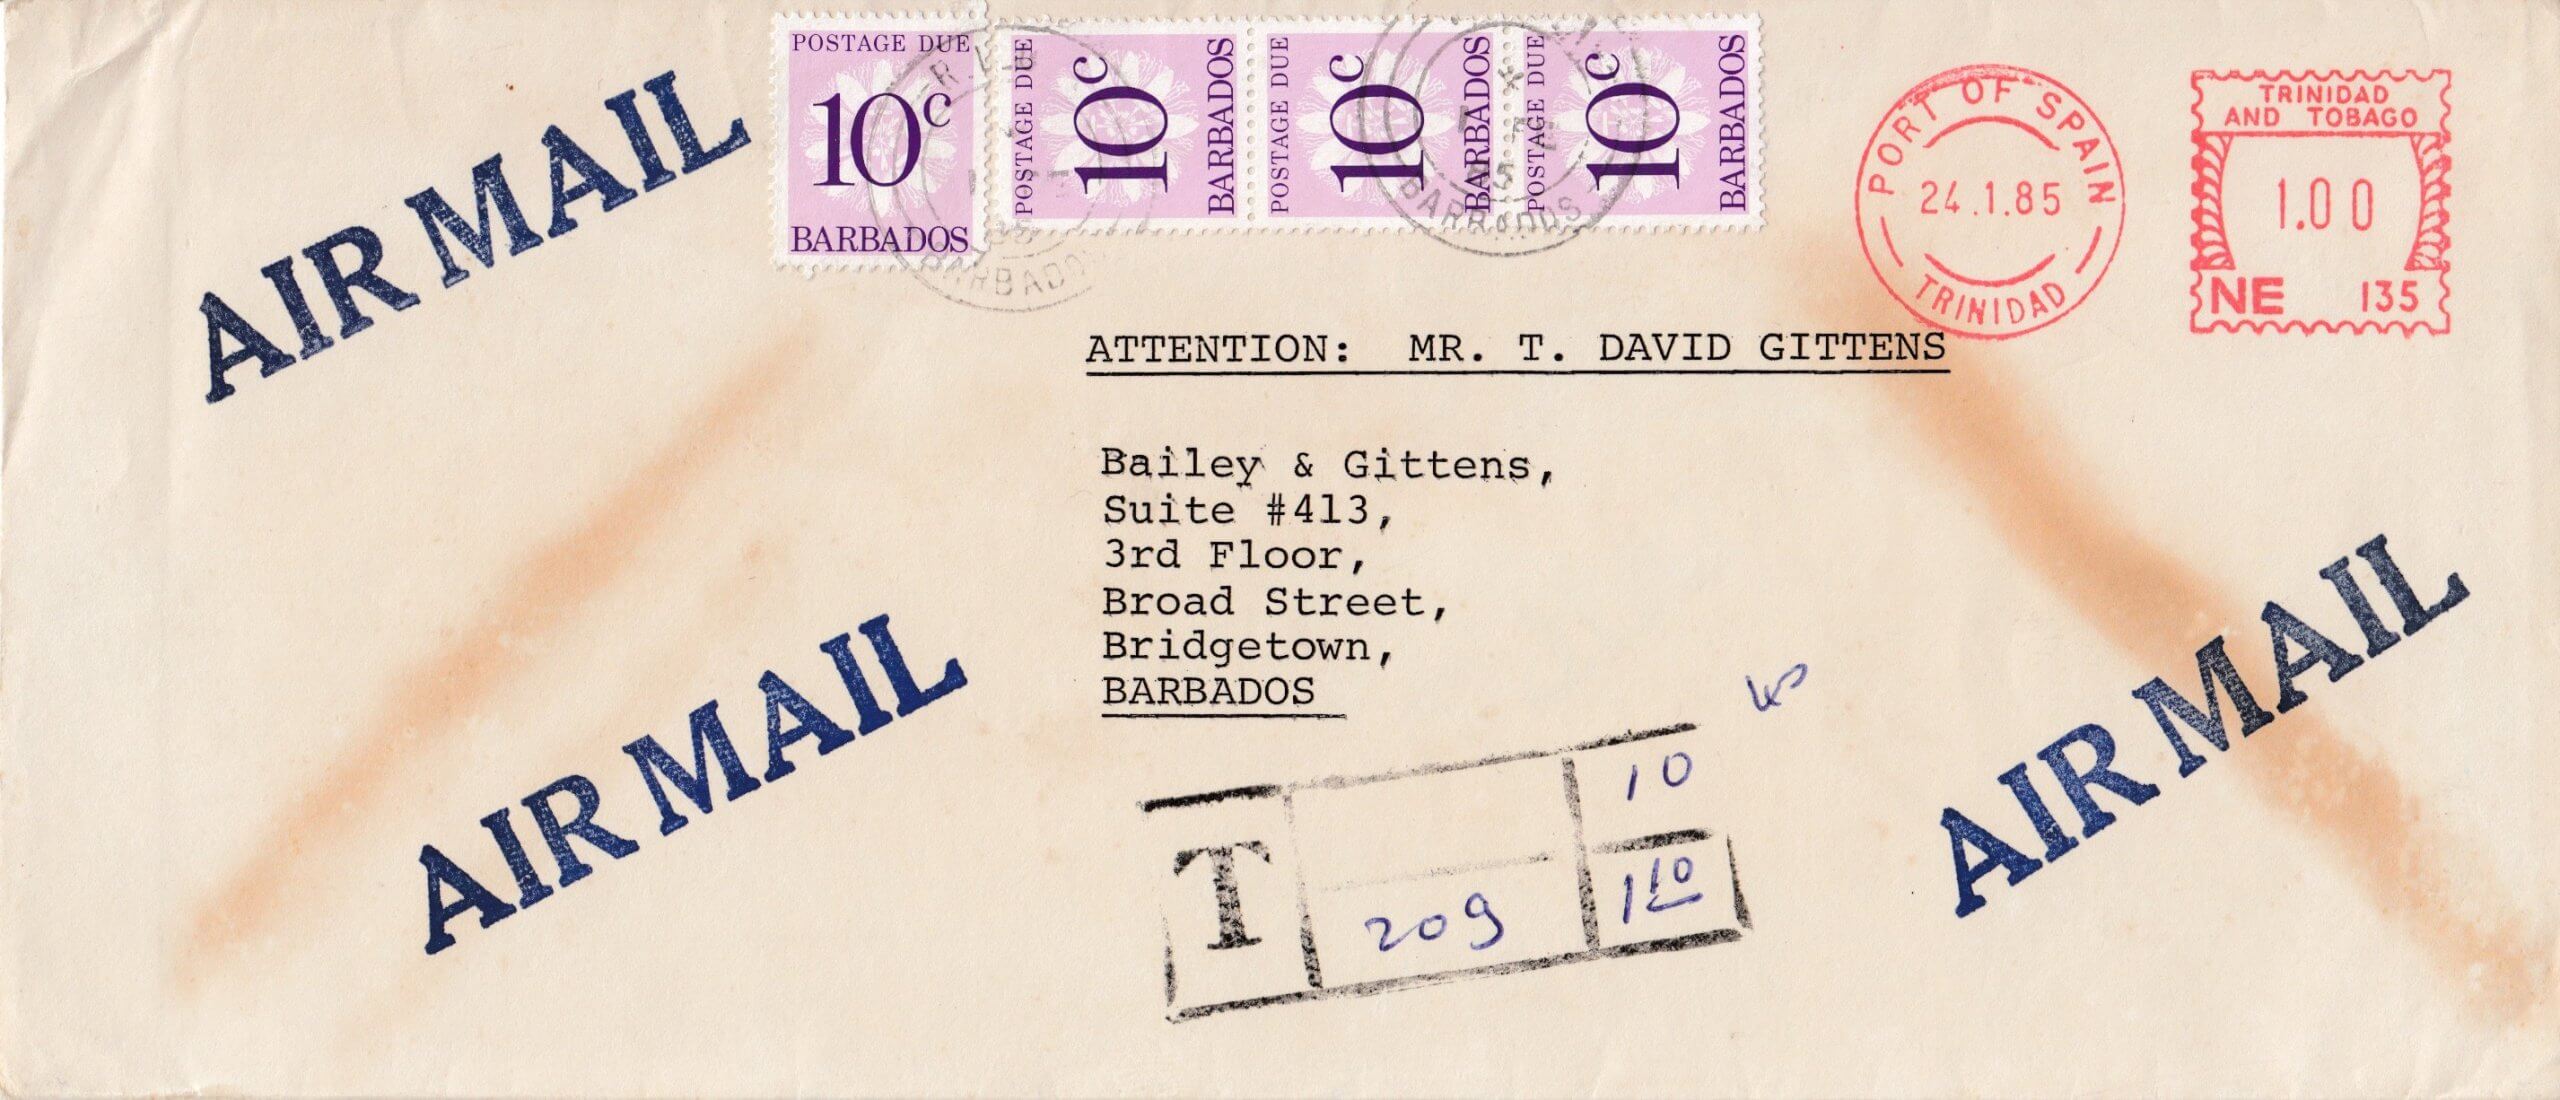 Barbados incoming underpaid airmail cover sent from Port of Spain Trinidad, 24th January 1985 Meter Mark, to Bailey & Gittens, Broad St, Bridgetown, with R.L.O. cancel over postage due stamps 1st February 1985. Tax mark for 20g letter calculated at 40c. Postage Dues are 4 x 10c (SGD17).